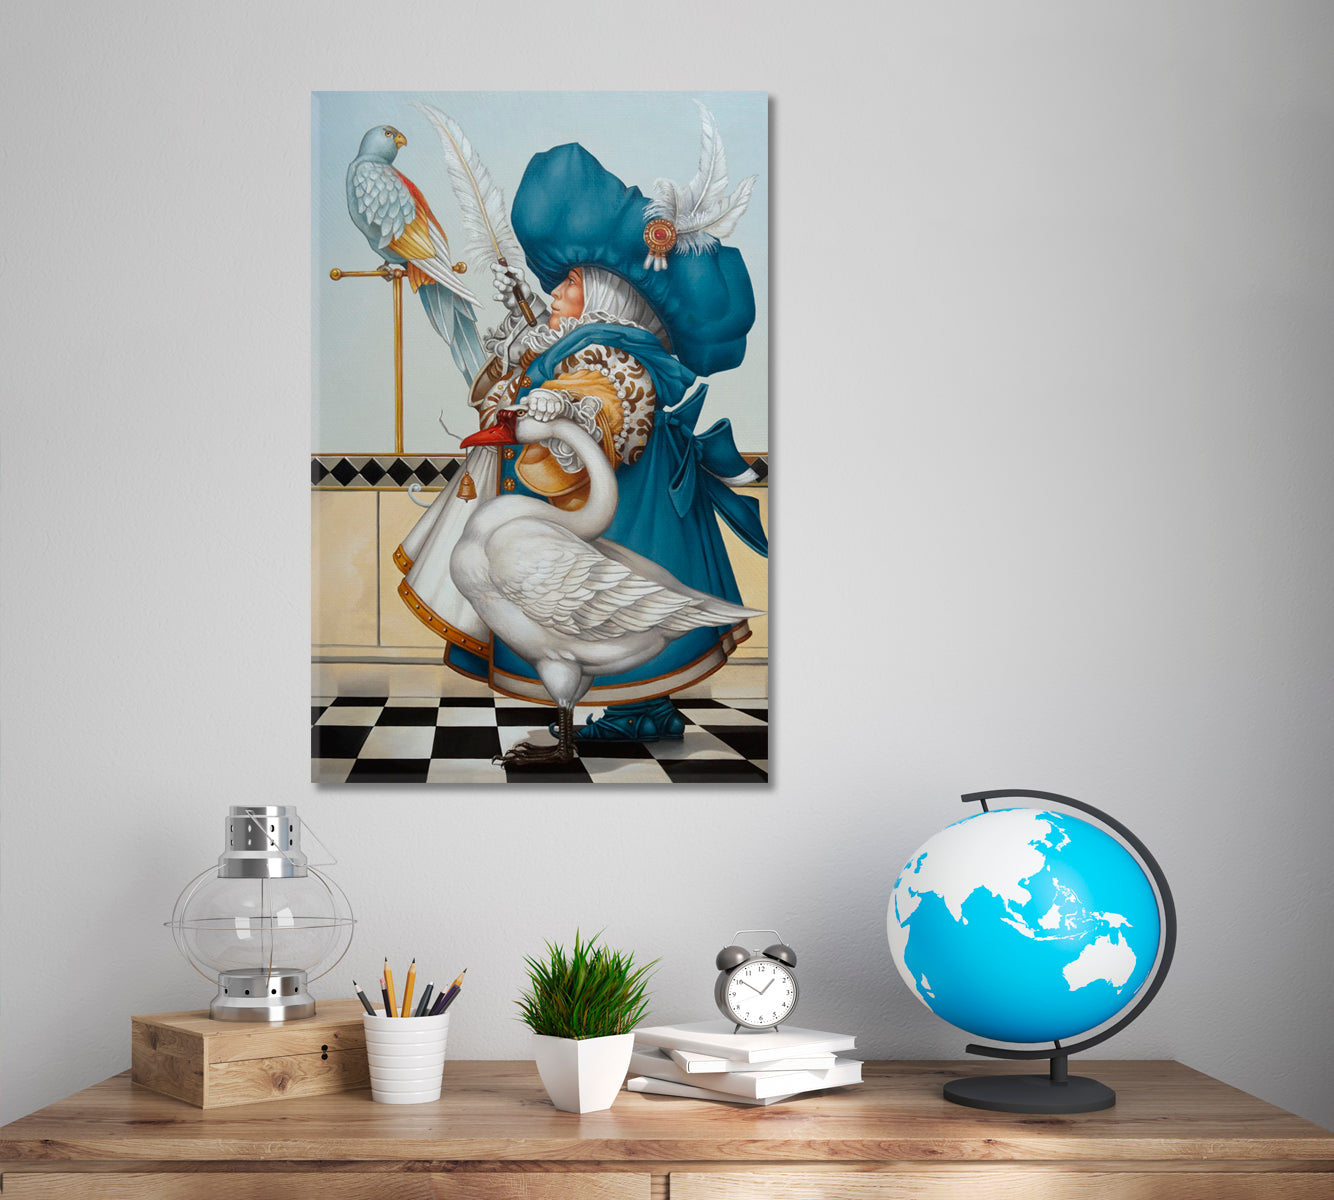 Gnome with Goose Surrealism Painting on Canvas Giclée Print | Vertical Surreal Fantasy Large Art Print Décor Artesty 1 Panel 16"x24" 